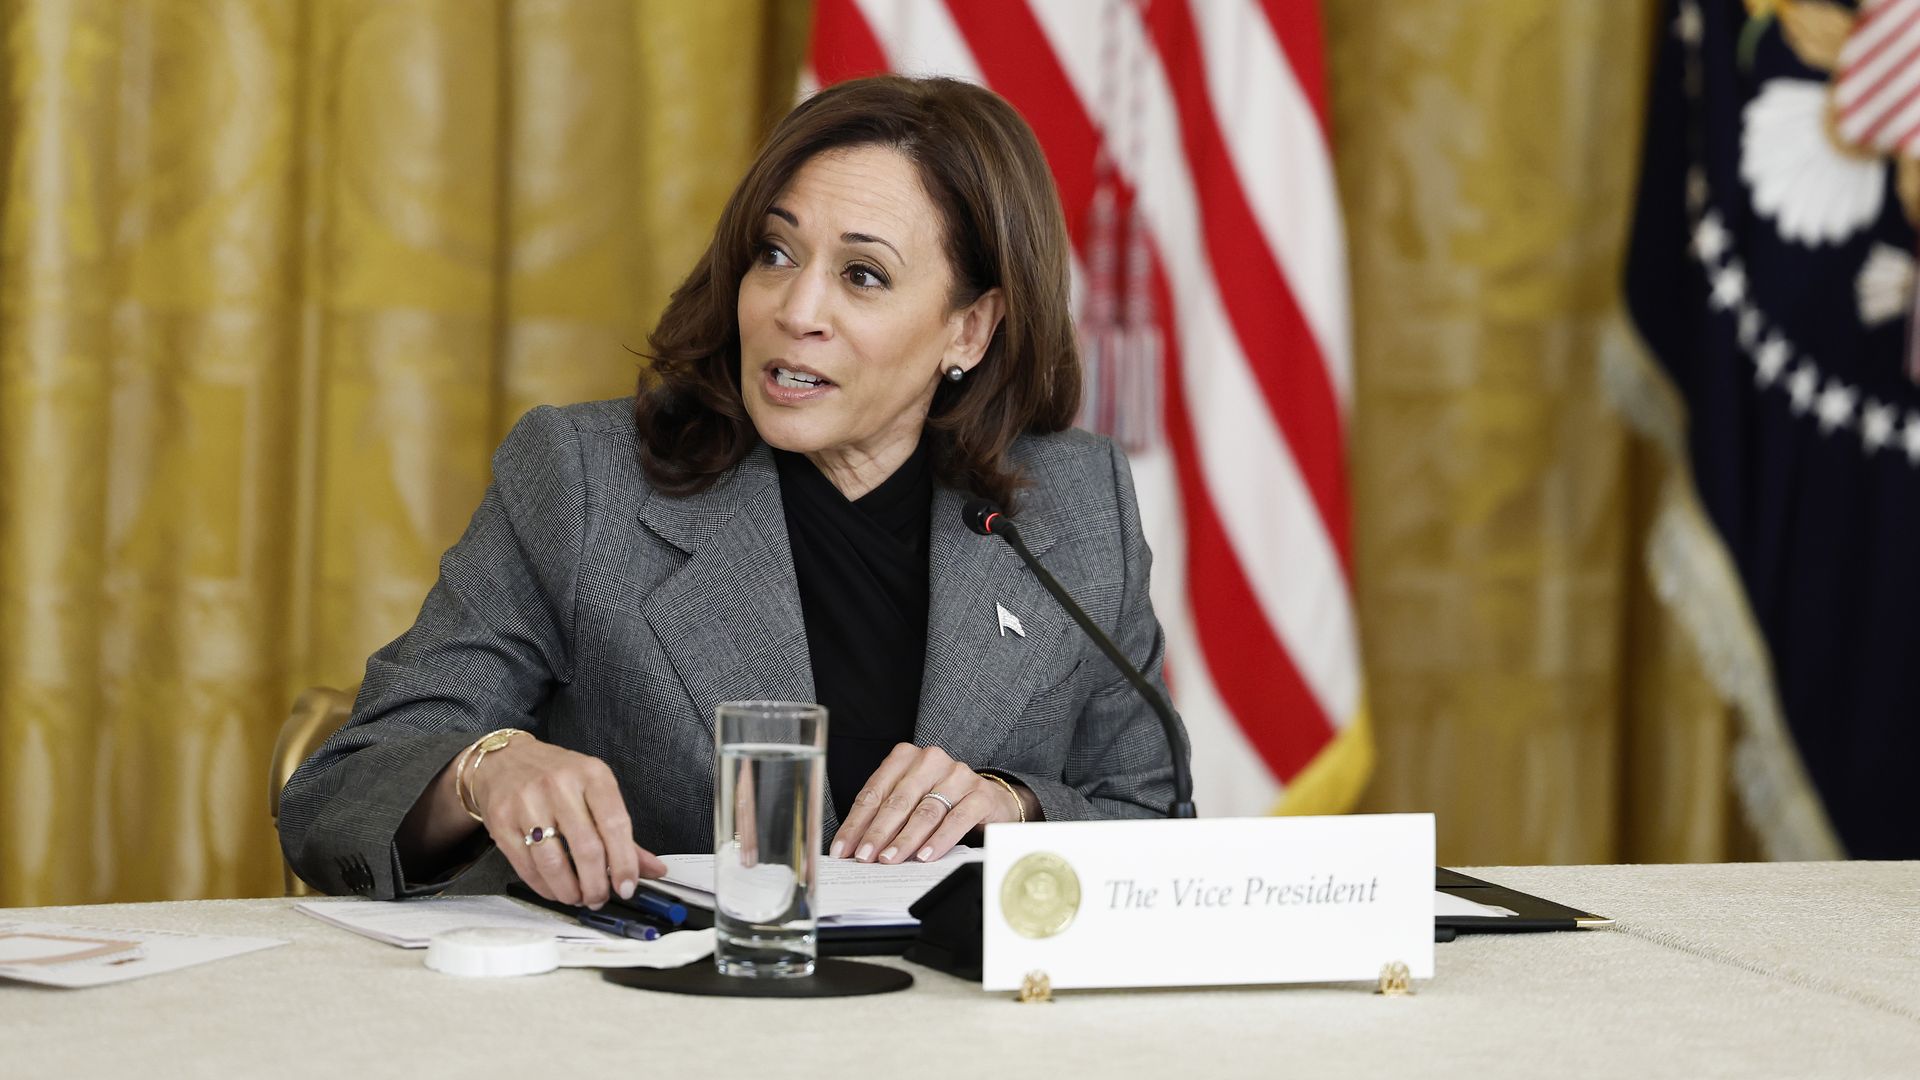 Picture of Kamala Harris sitting on a table with a sign that says "Vice President" in front of her